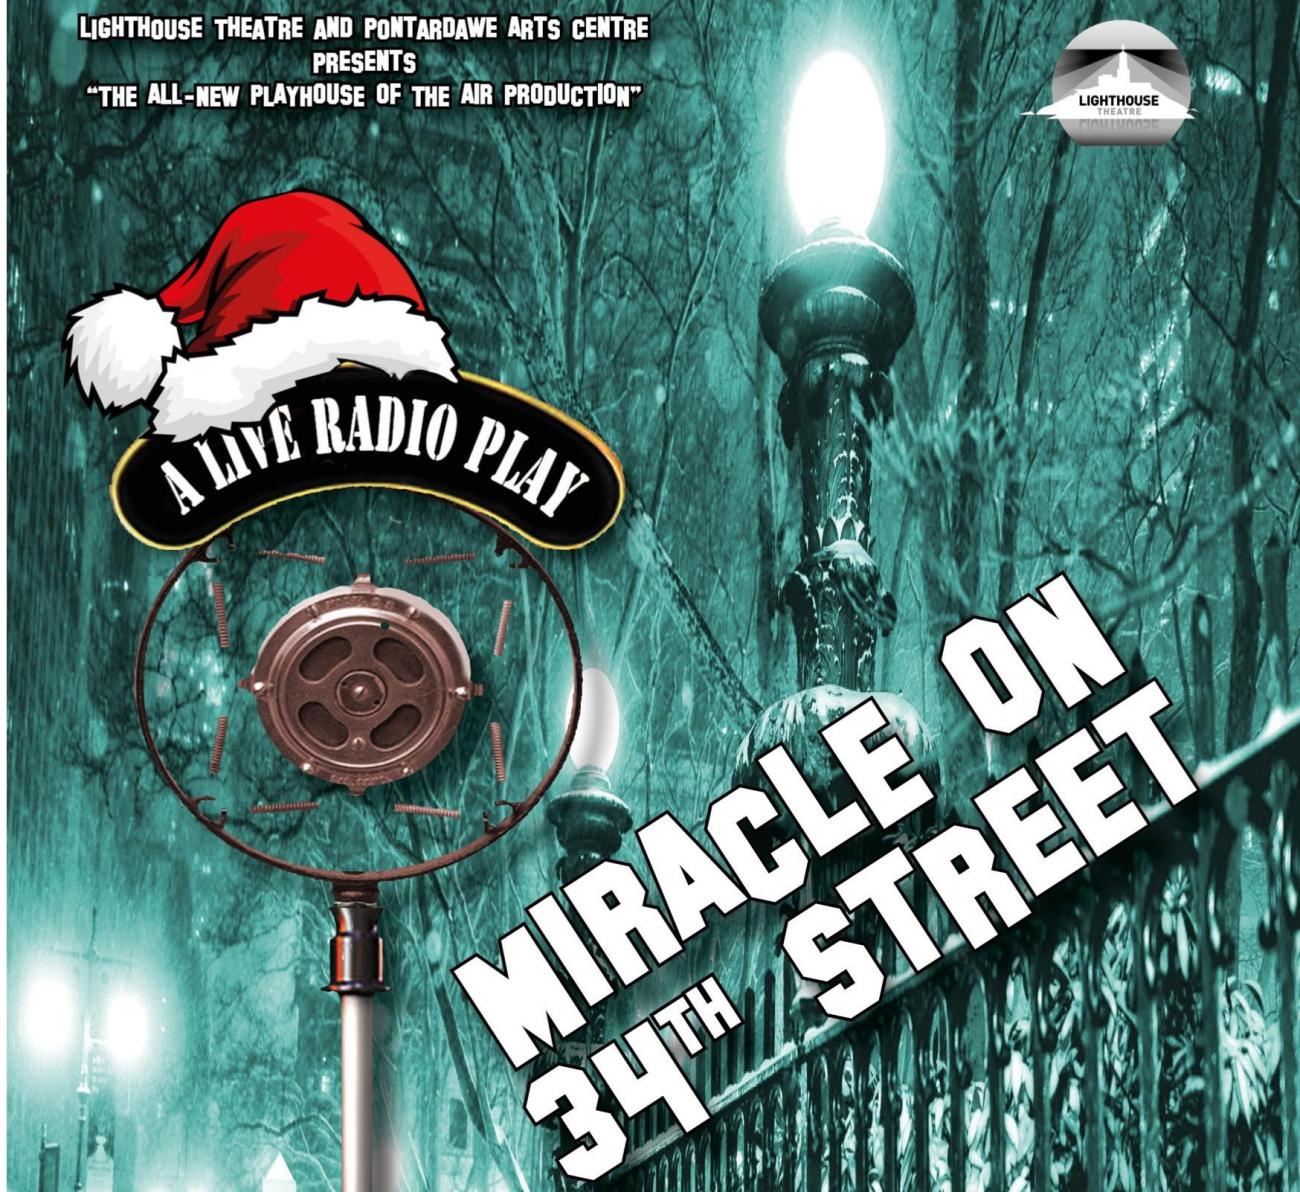 Lighthouse Theatre: Miracle on 34th Street